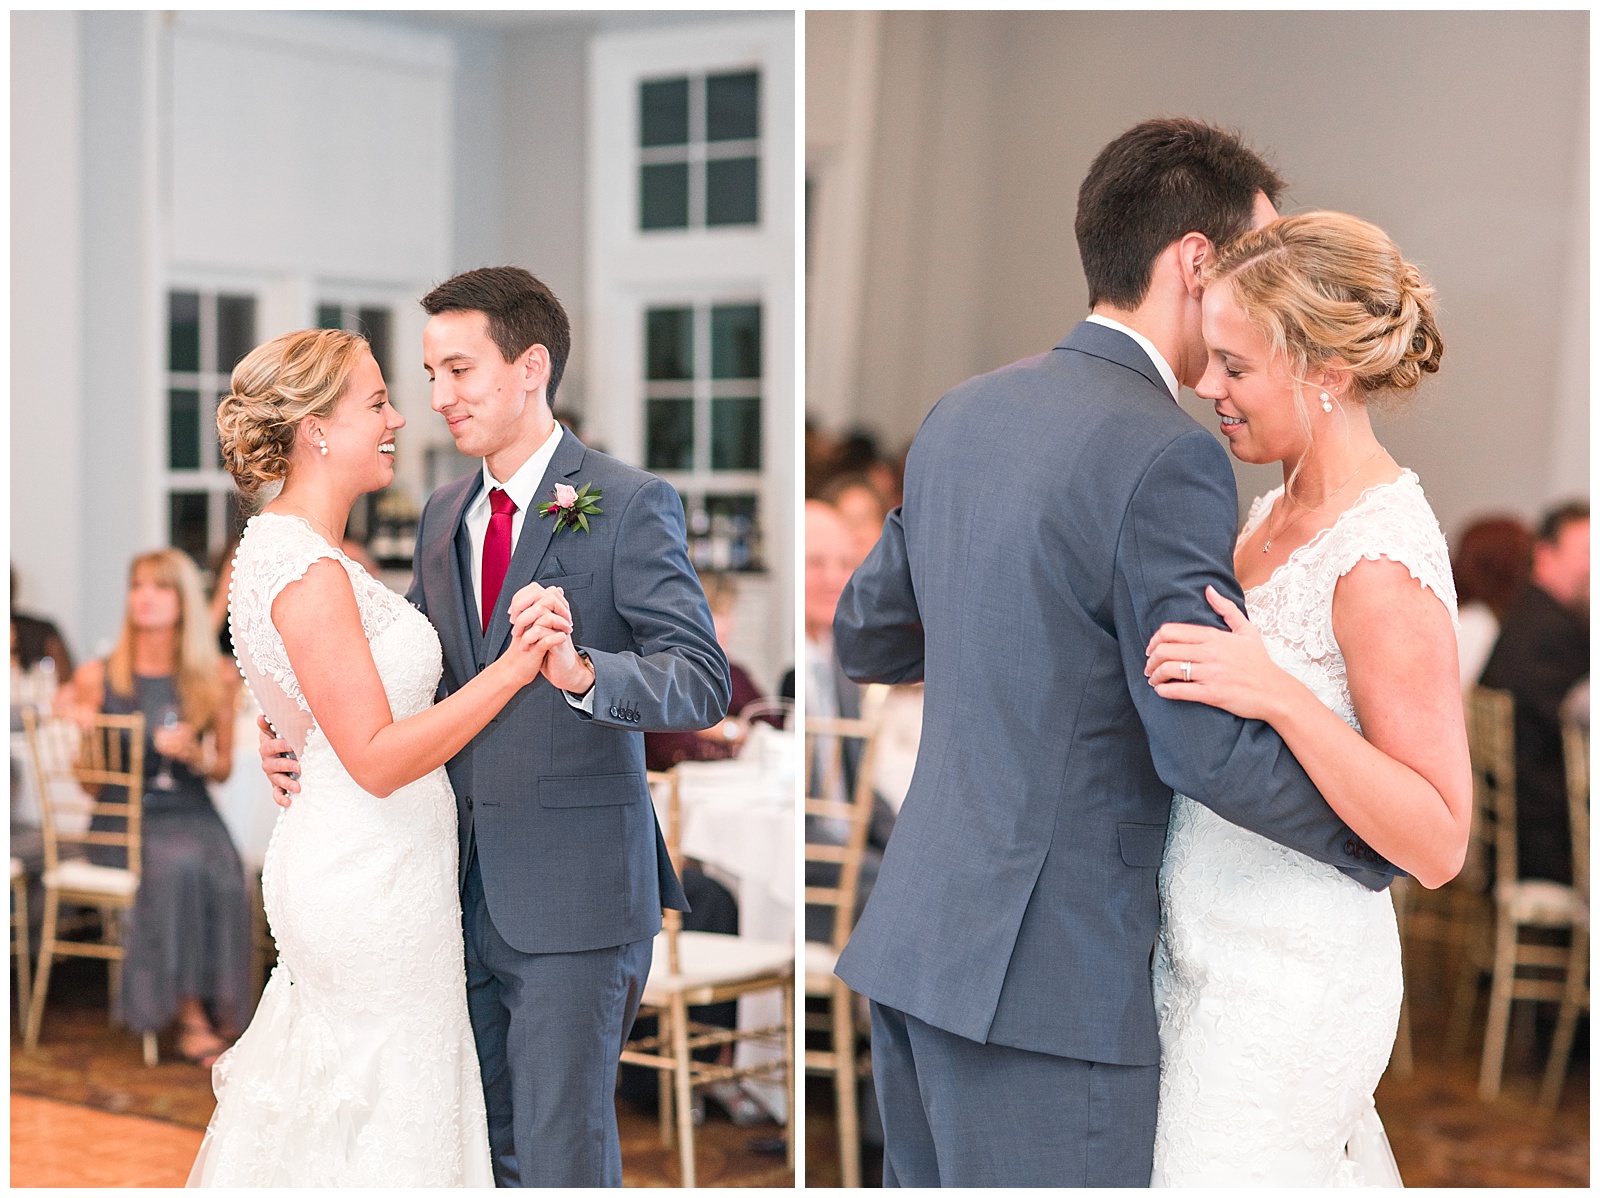 Tony + Tyler Wedding at Independence Golf Club by the tuckers photography